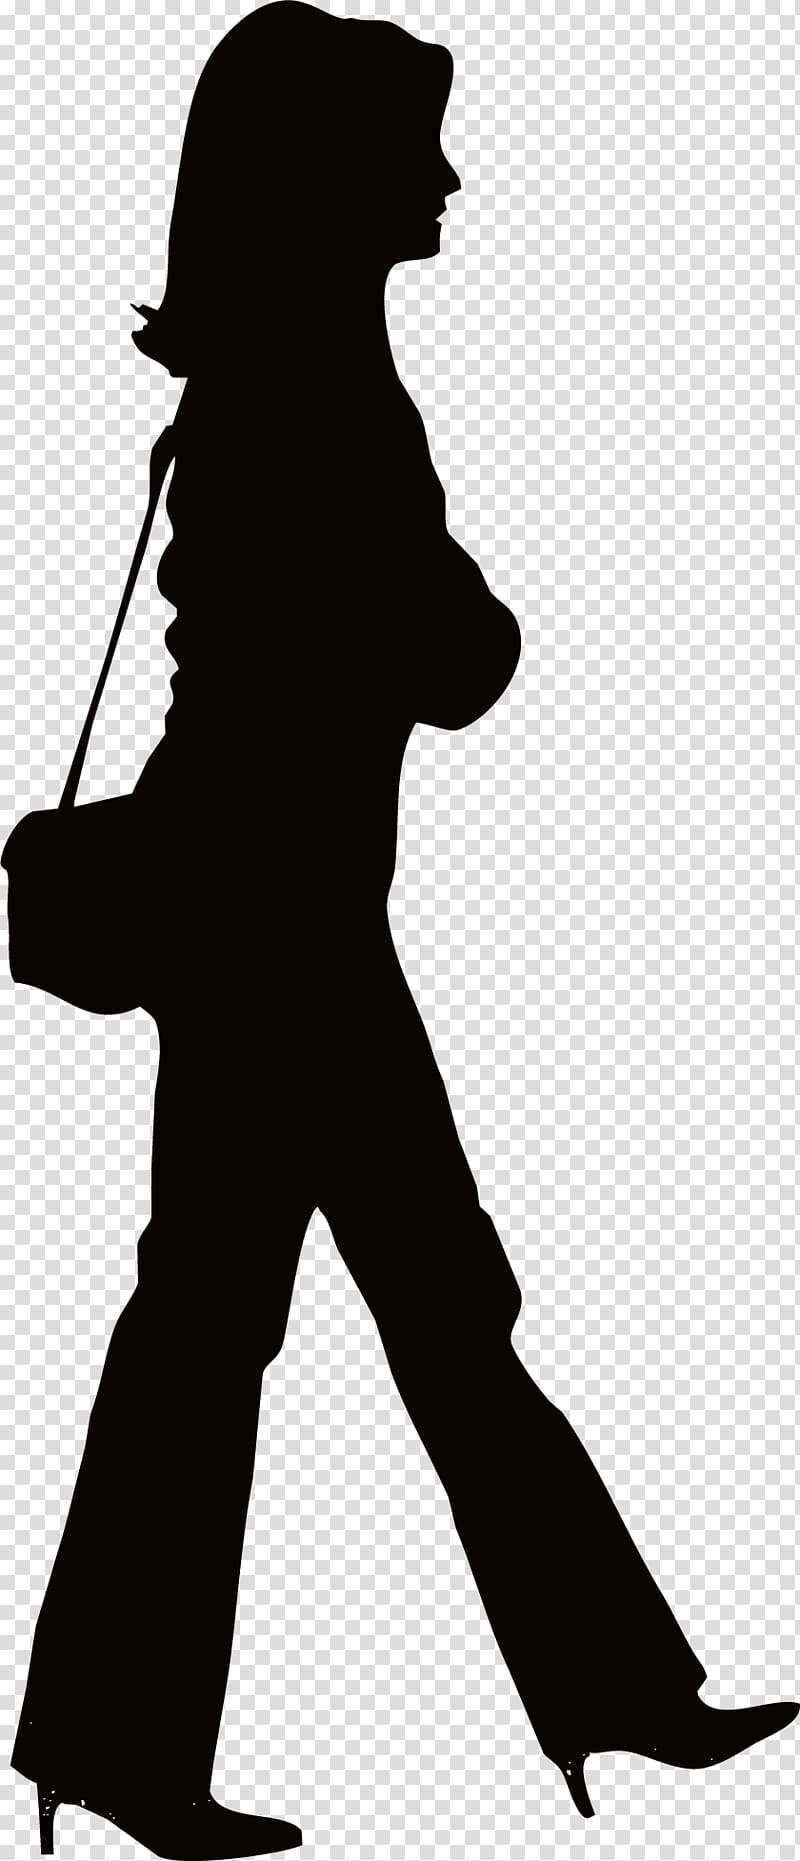 silhouette of woman carrying sling bag, Silhouette Walking Icon, Shopping woman transparent background PNG clipart